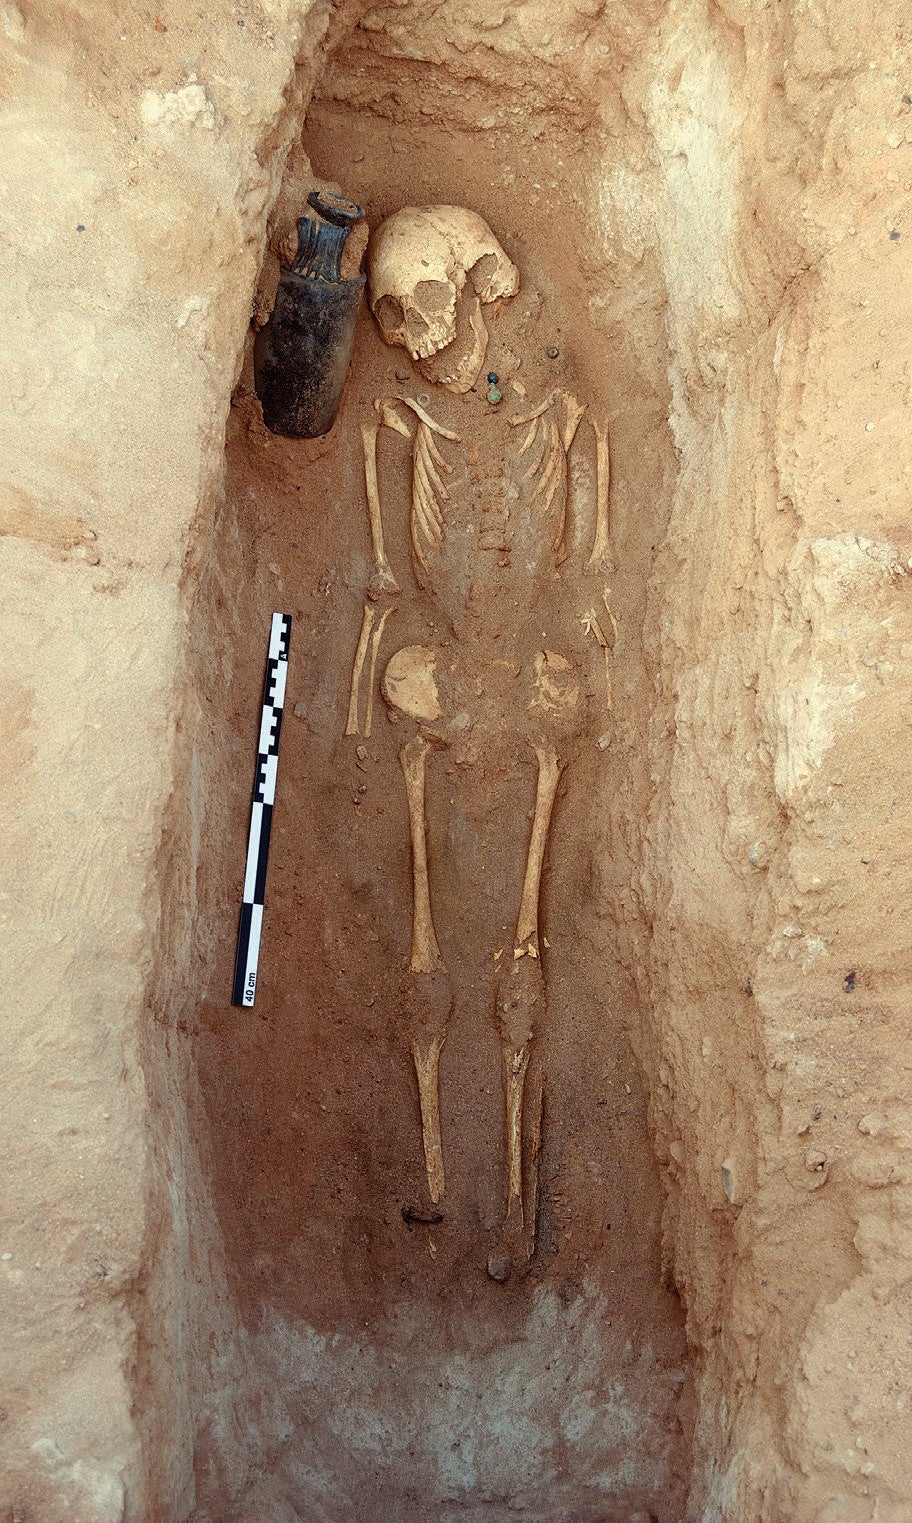 this-is-the-excavated-tomb-of-a-young-somali-child-7-years-v0-8idcb40xo3j91.jpg